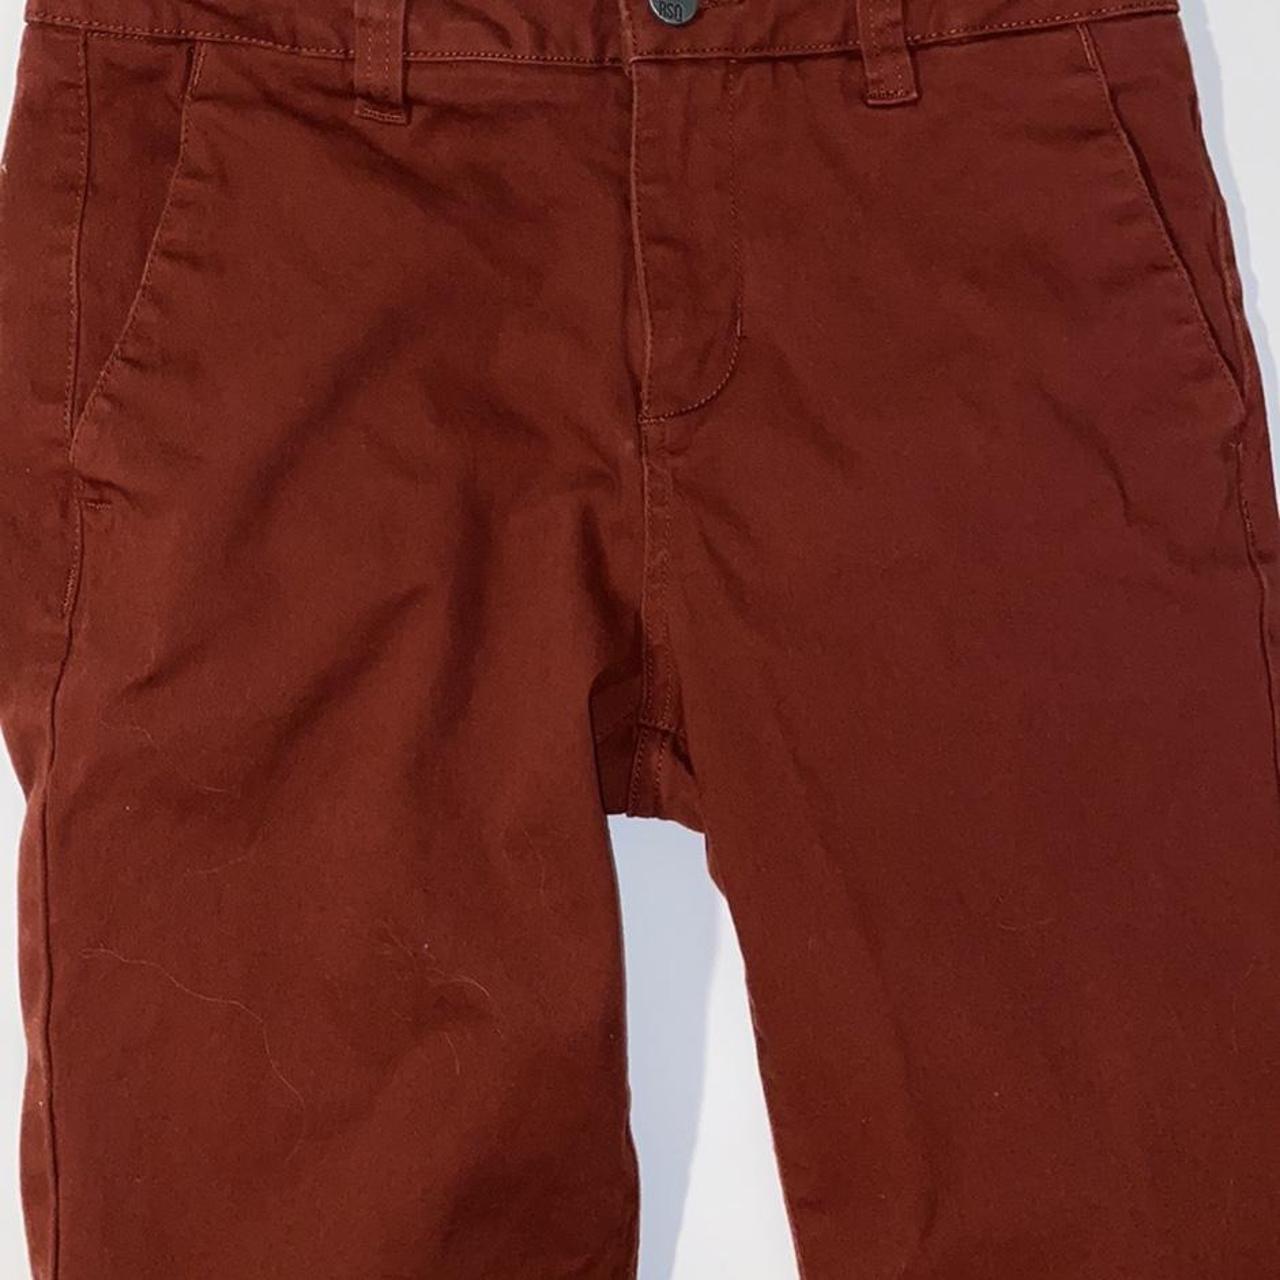 Product Image 1 - RSQ Men’s London Skinny Chinos

Burnt